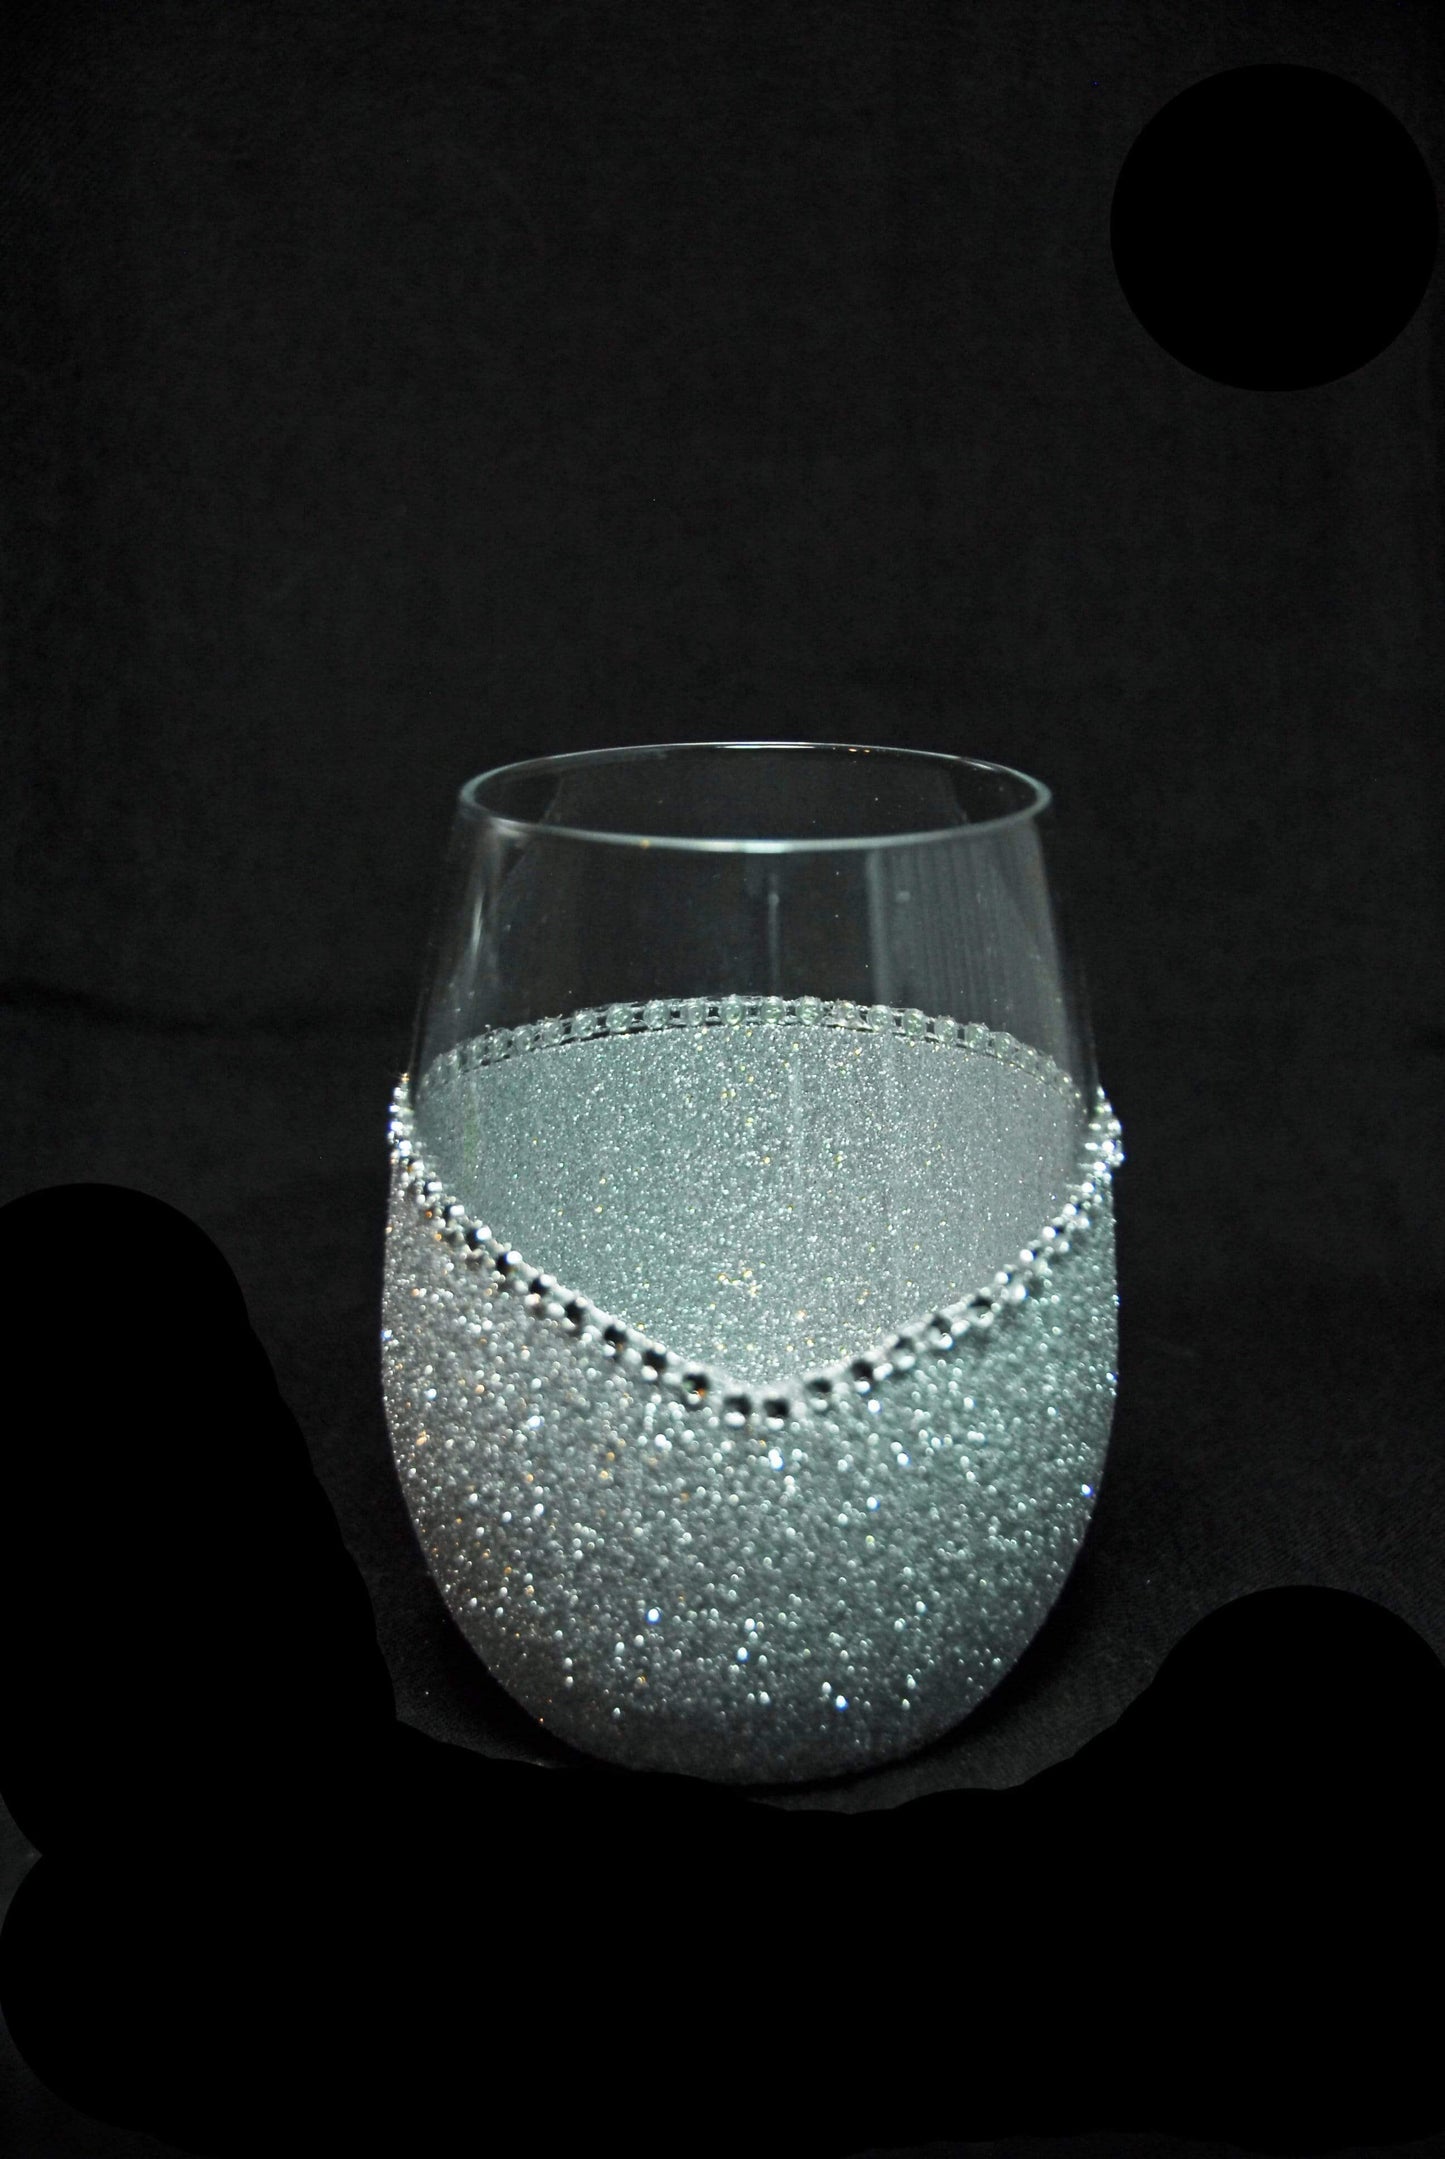 Funny "Classy Bitch" Saying- Bling Stem or Stemless Wine Glasses-Choose your color - Winey Bitches - Wine- Women- K9's